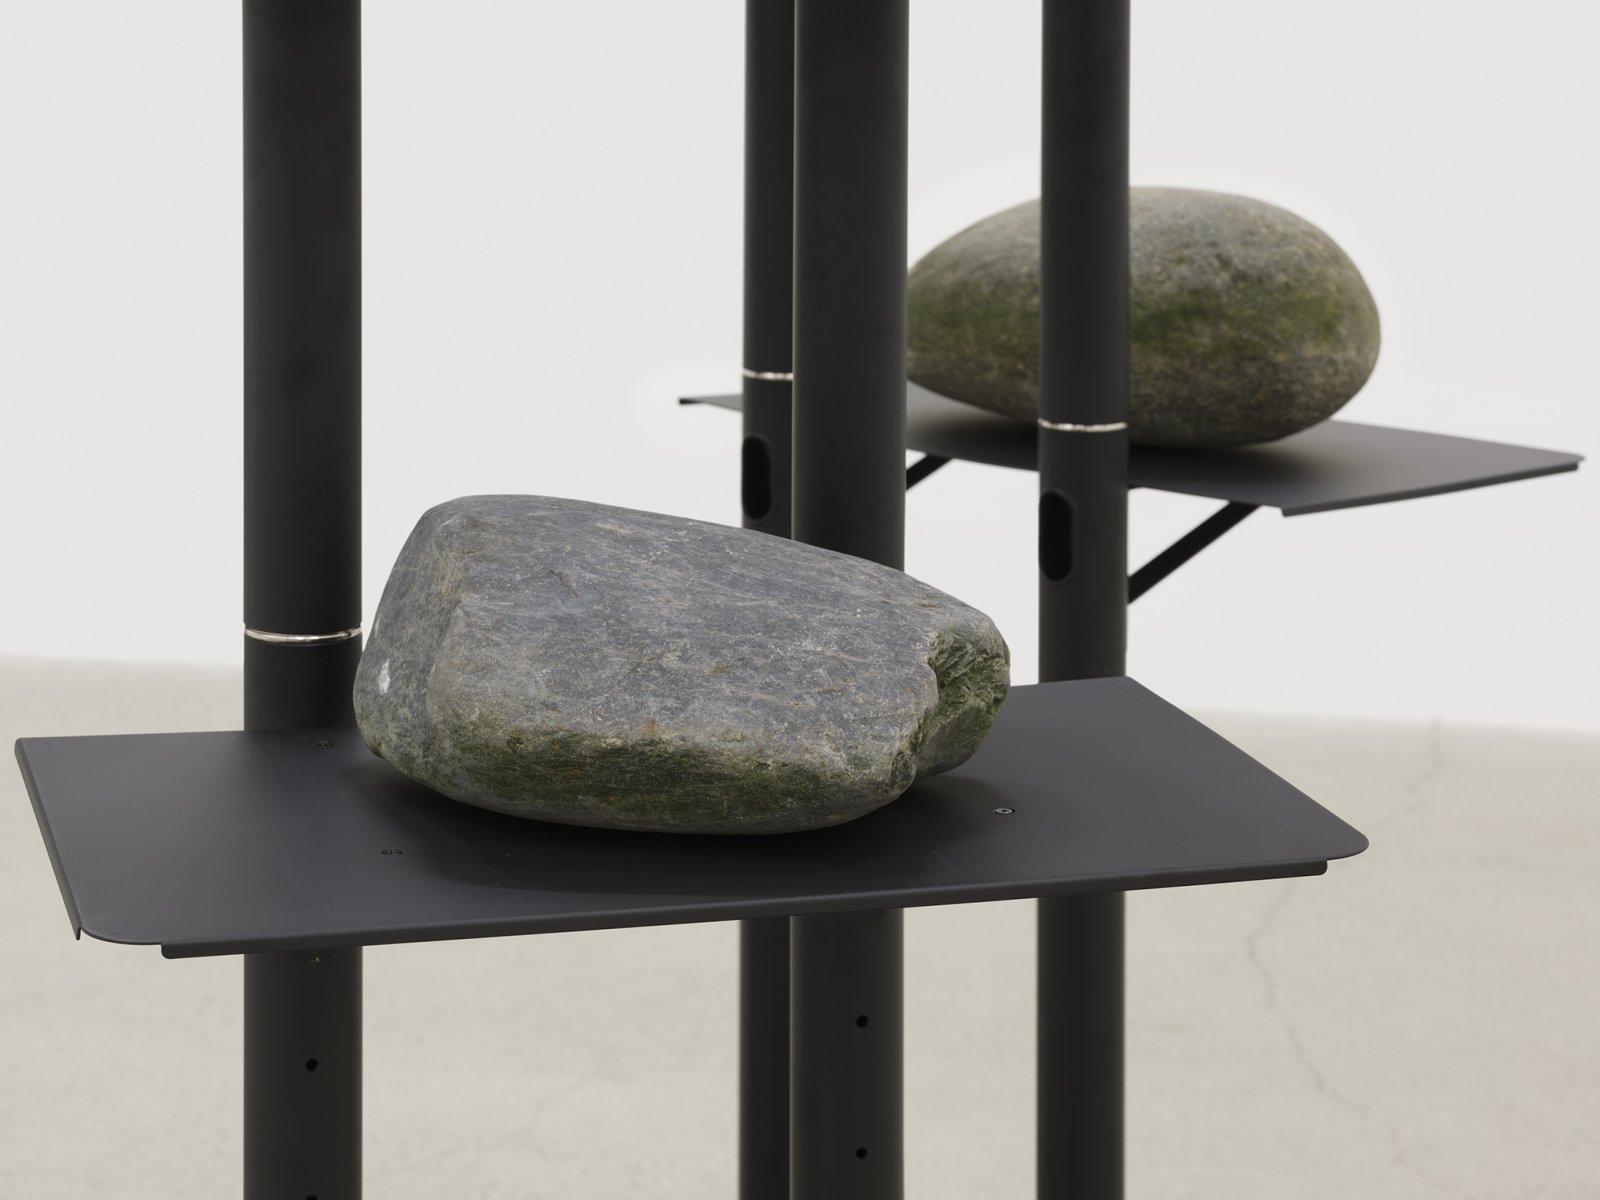 Duane Linklater, primaryuse (detail), 2020, mixed media, dimensions variable by Duane Linklater